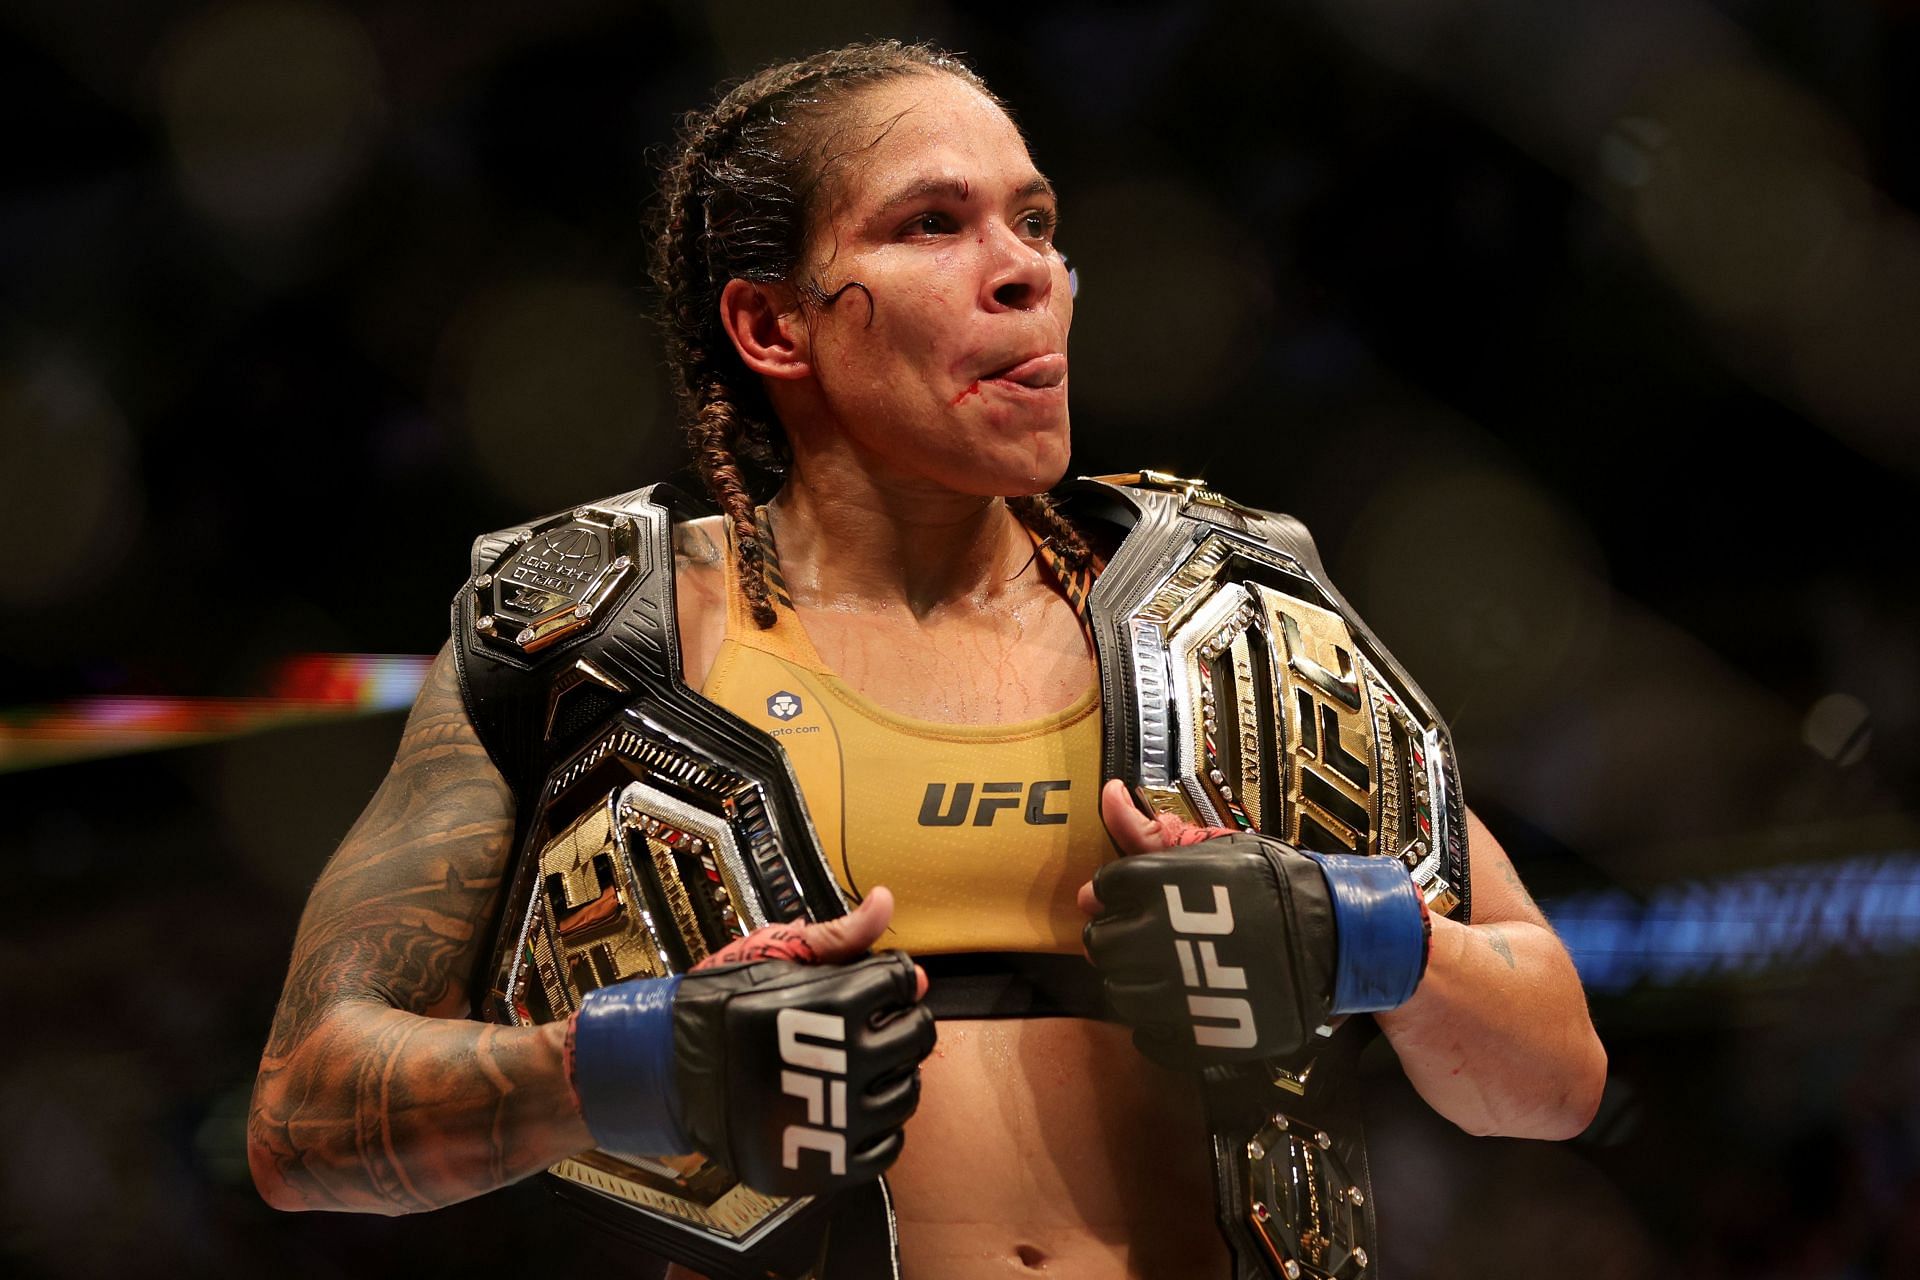 Amanda Nunes has defended both of her titles successfully in the octagon